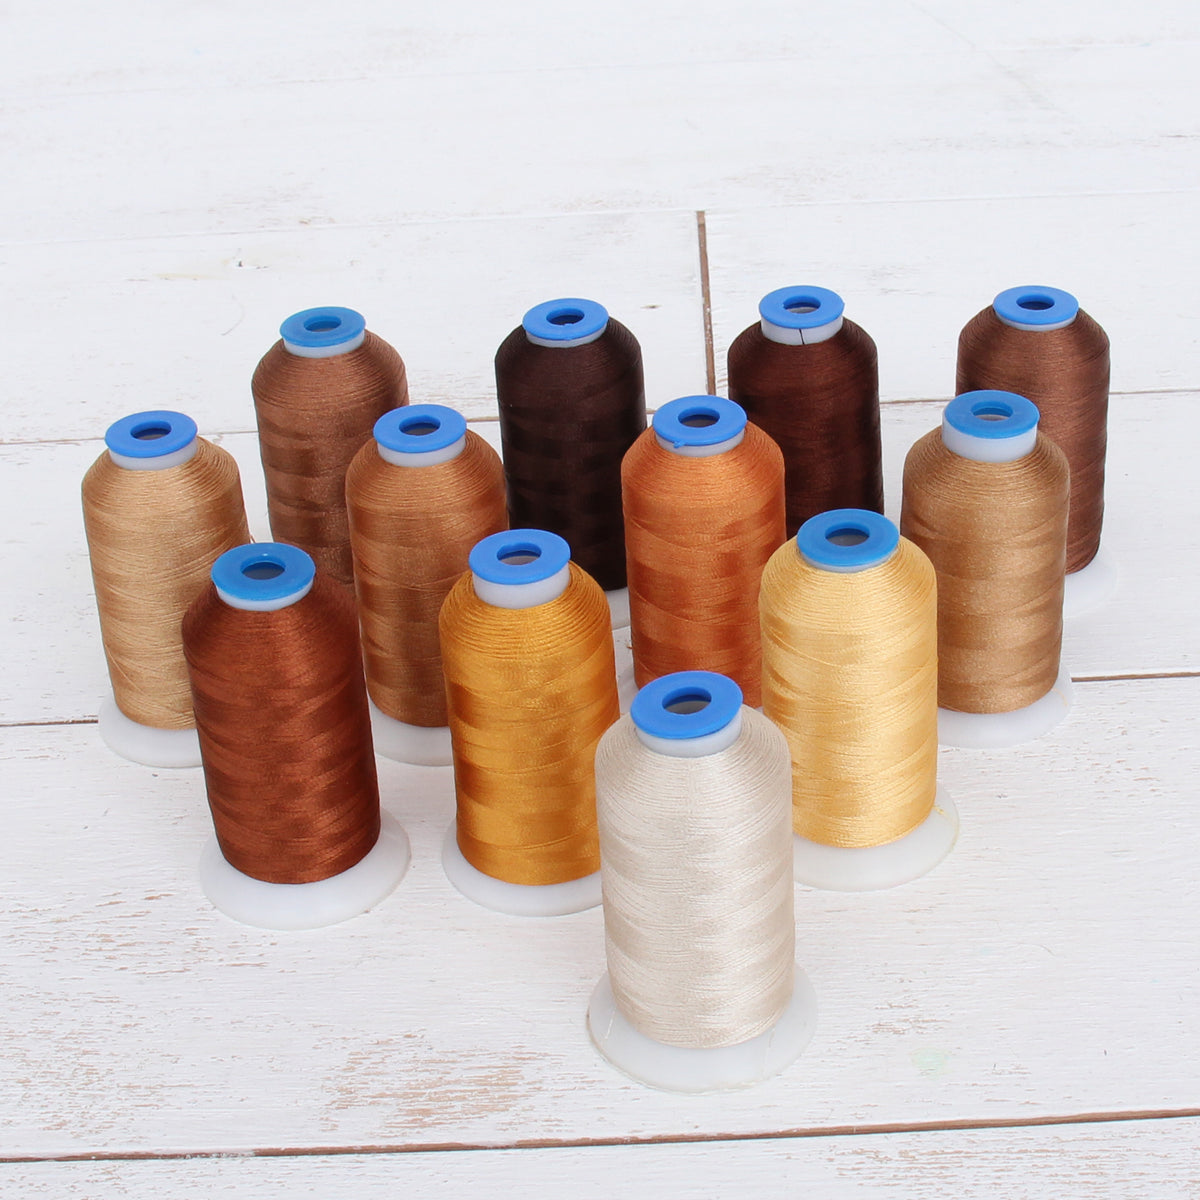 Threadart Cotton Sewing Thread - 1000M Spools - 50/3 - Beige - 50 Colors Available